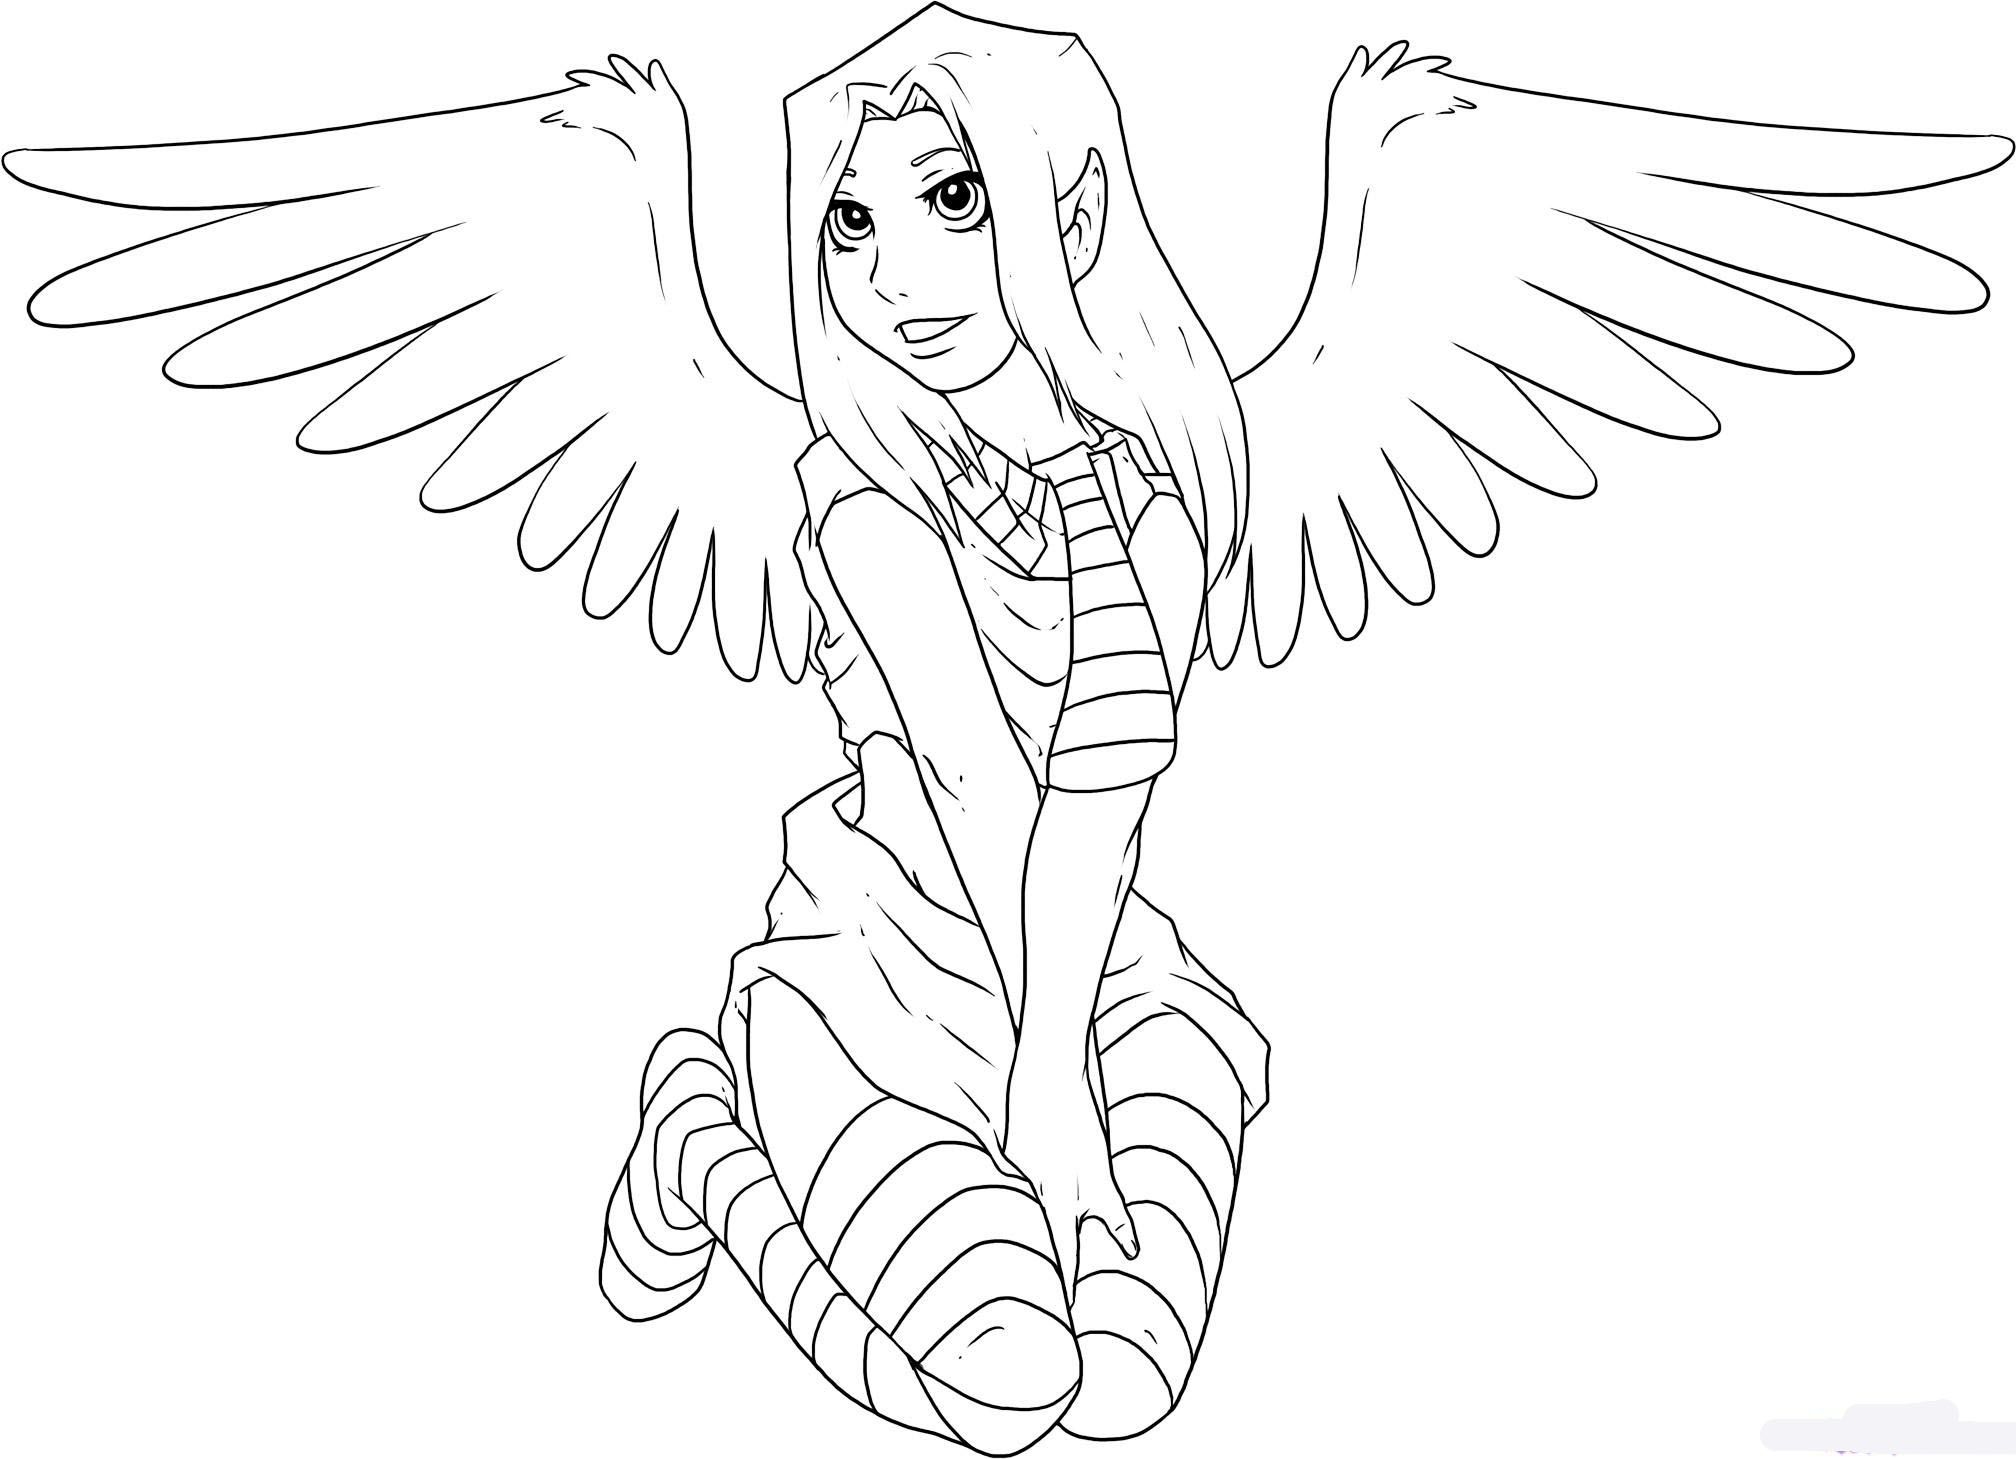 how-to-draw-a-angel-step-7_1_000000016105_5